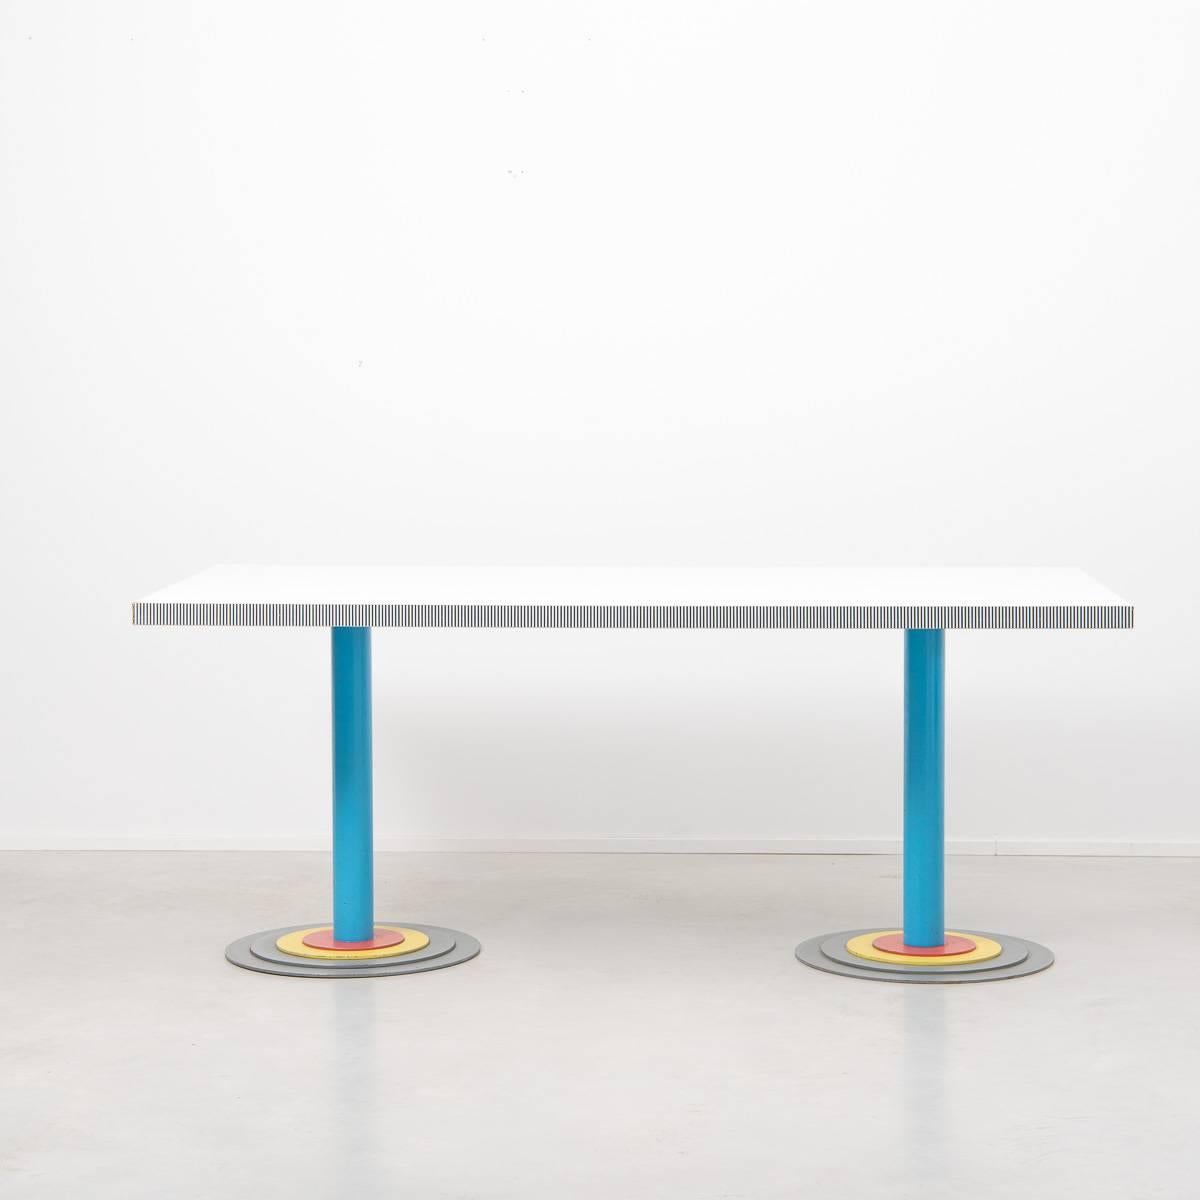 A striking and rare dining table that would also work well as a desk. Produced Driade, the company which Astori cofounded in 1968. The table has a formica top which sits on top of colored metal twin pedestals. A fantastic example of early Italian